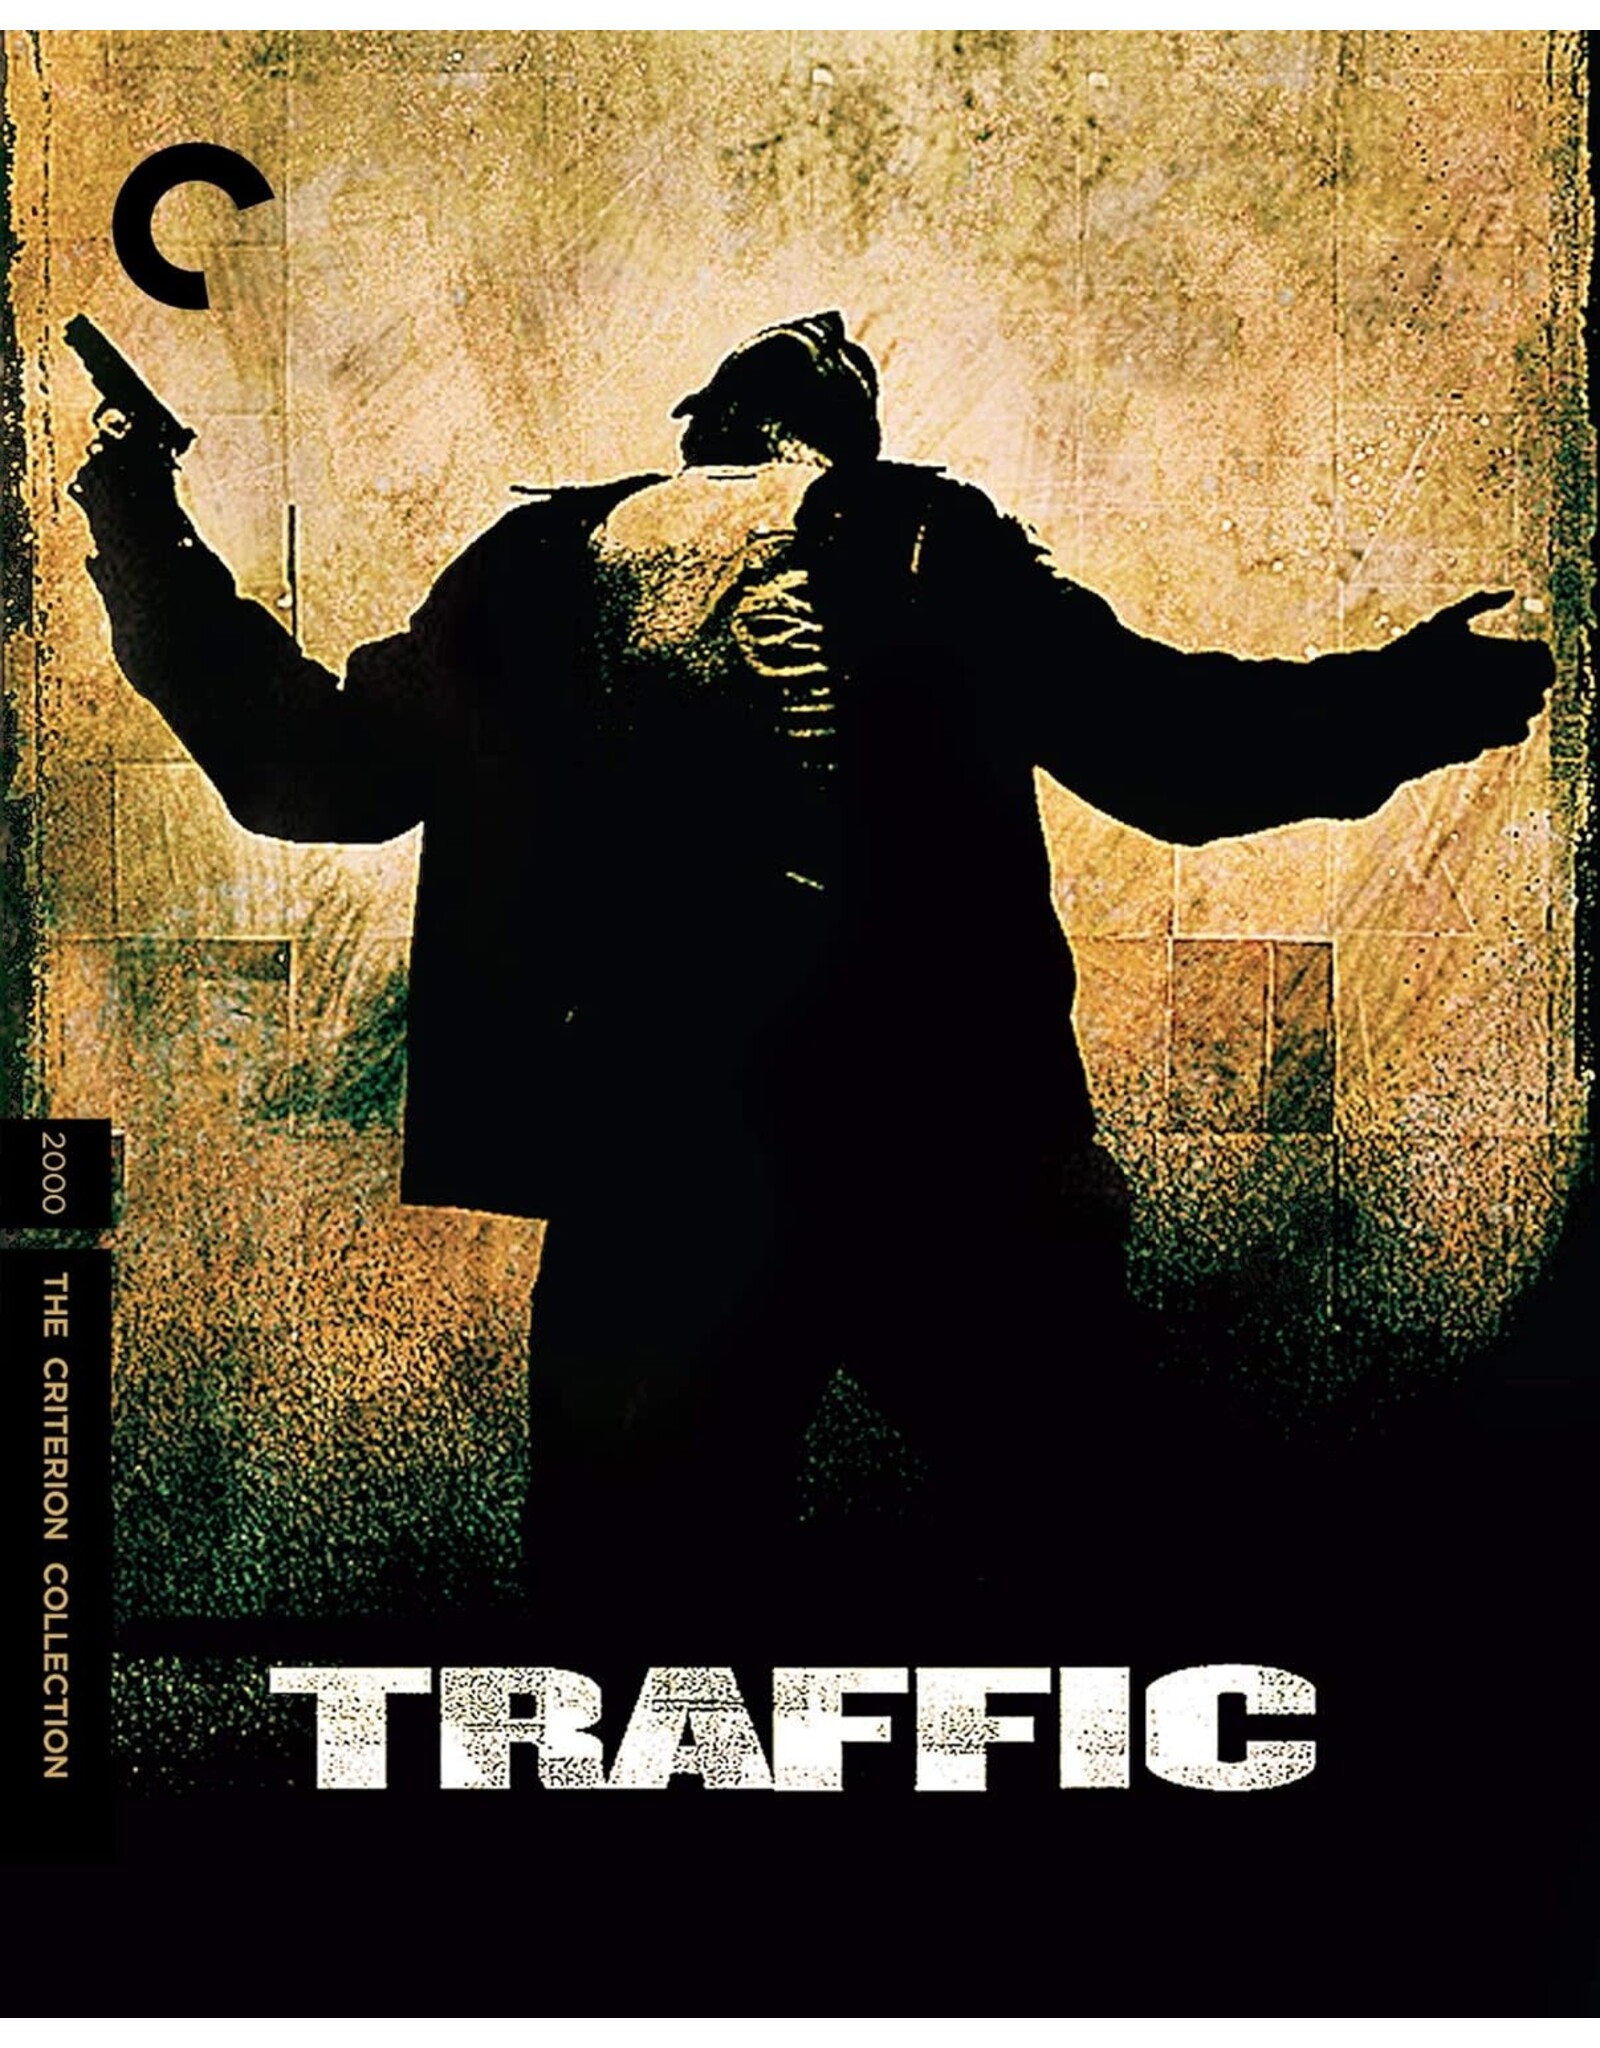 Criterion Collection Traffic - Criterion Collection (Used)